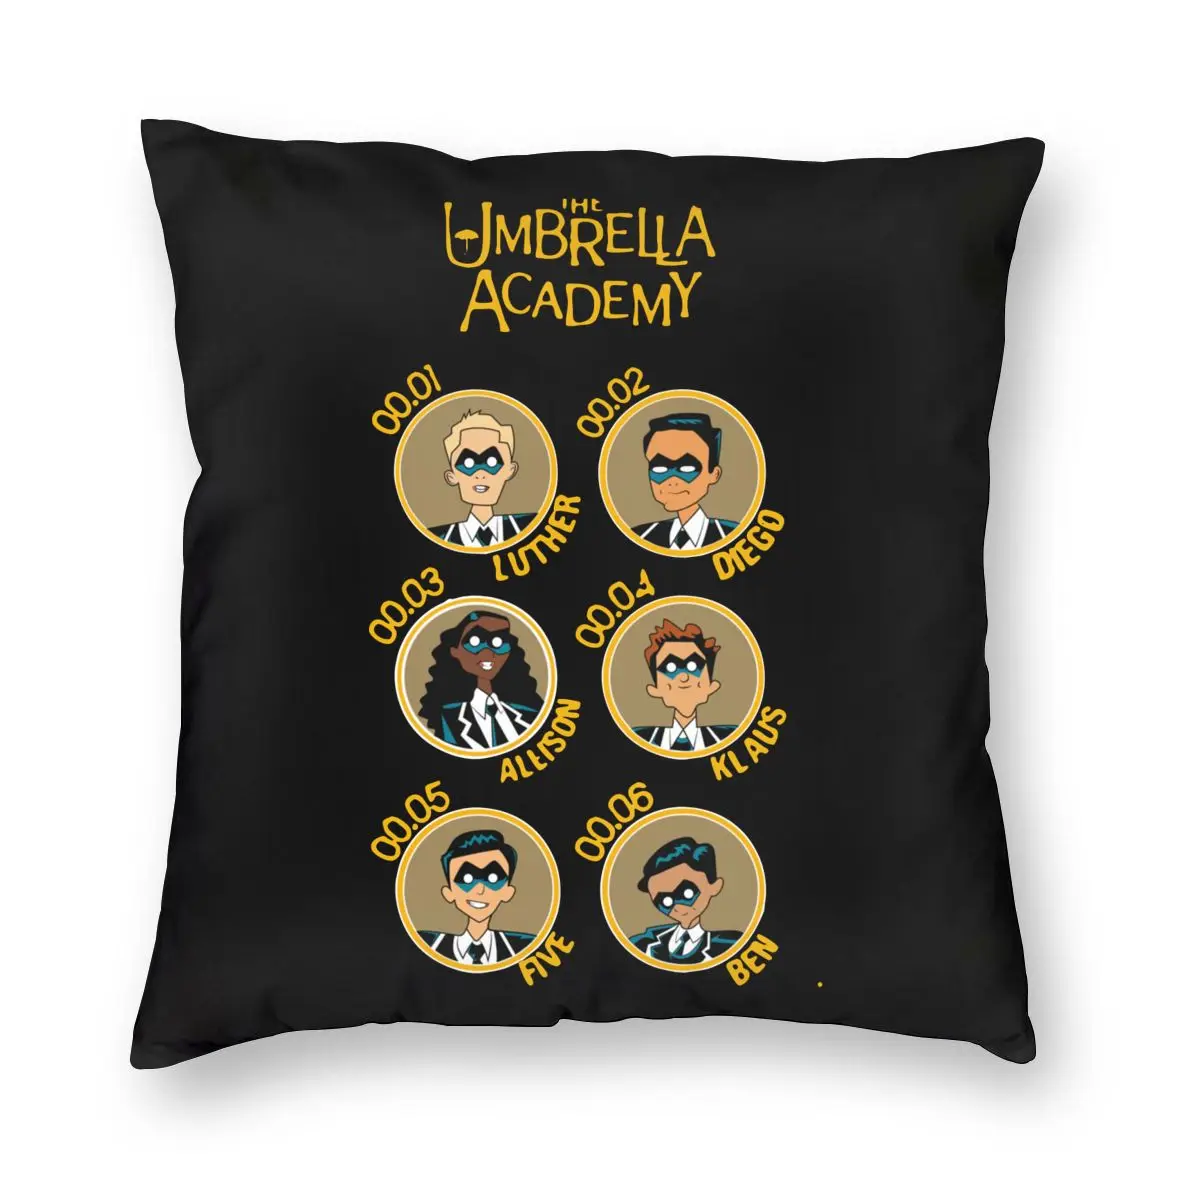 

The Umbrella Academy All Characters Pillowcase Home Decor Cushion Cover Throw Pillow for Living Room Double-sided Printing